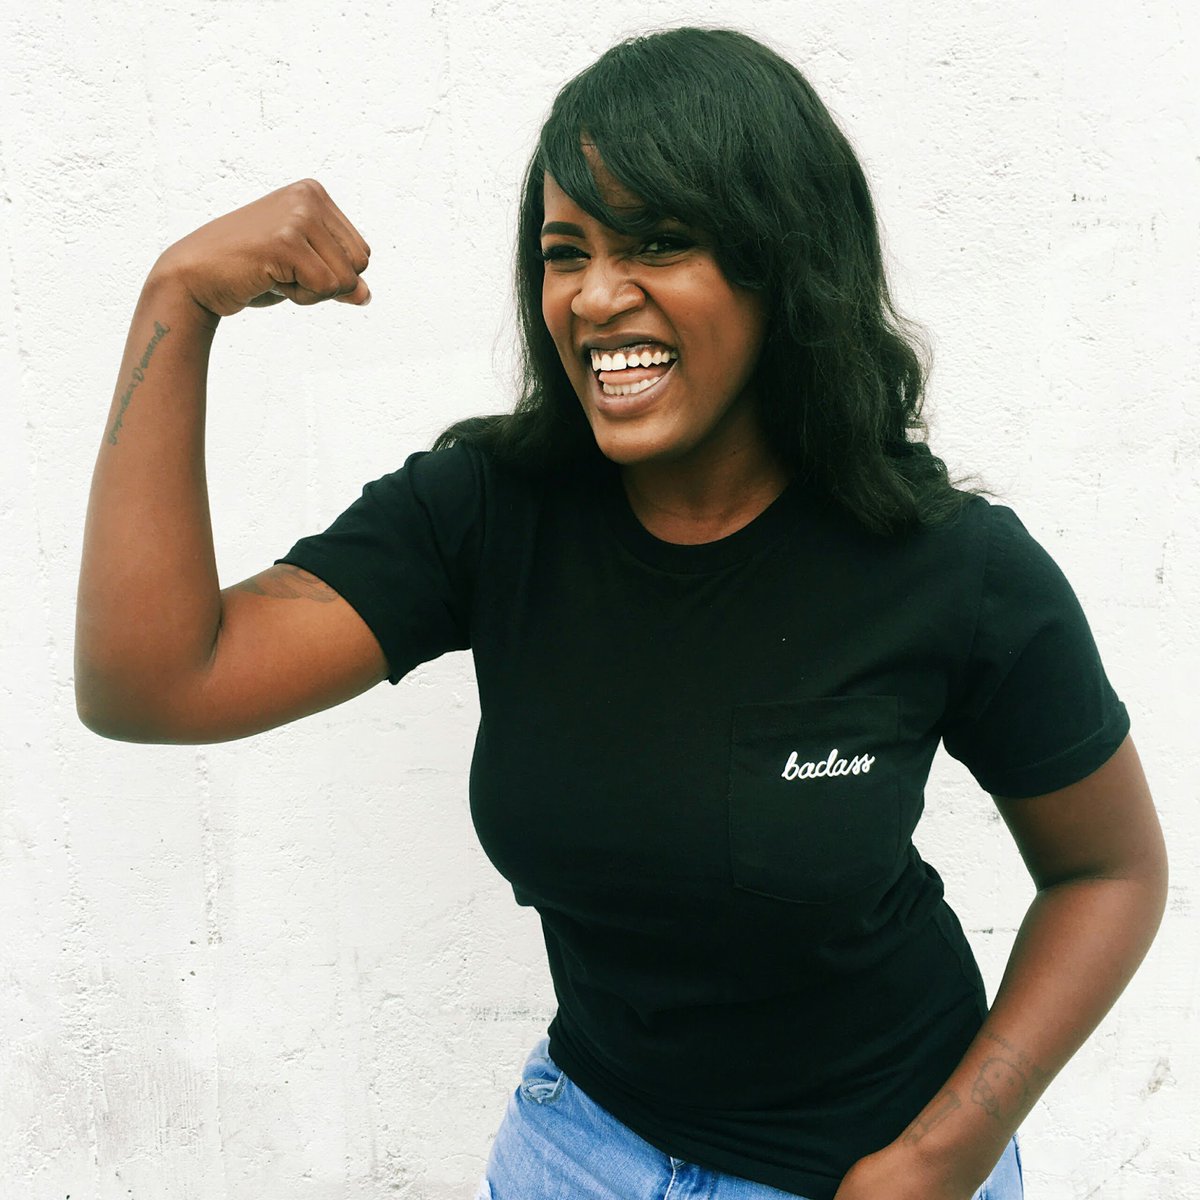 We still have work to do ???? @whohahadotcom's got the perfect tee for #WomensEqualityDay!  https://t.co/acp6gDjiot https://t.co/hXSAABecrn